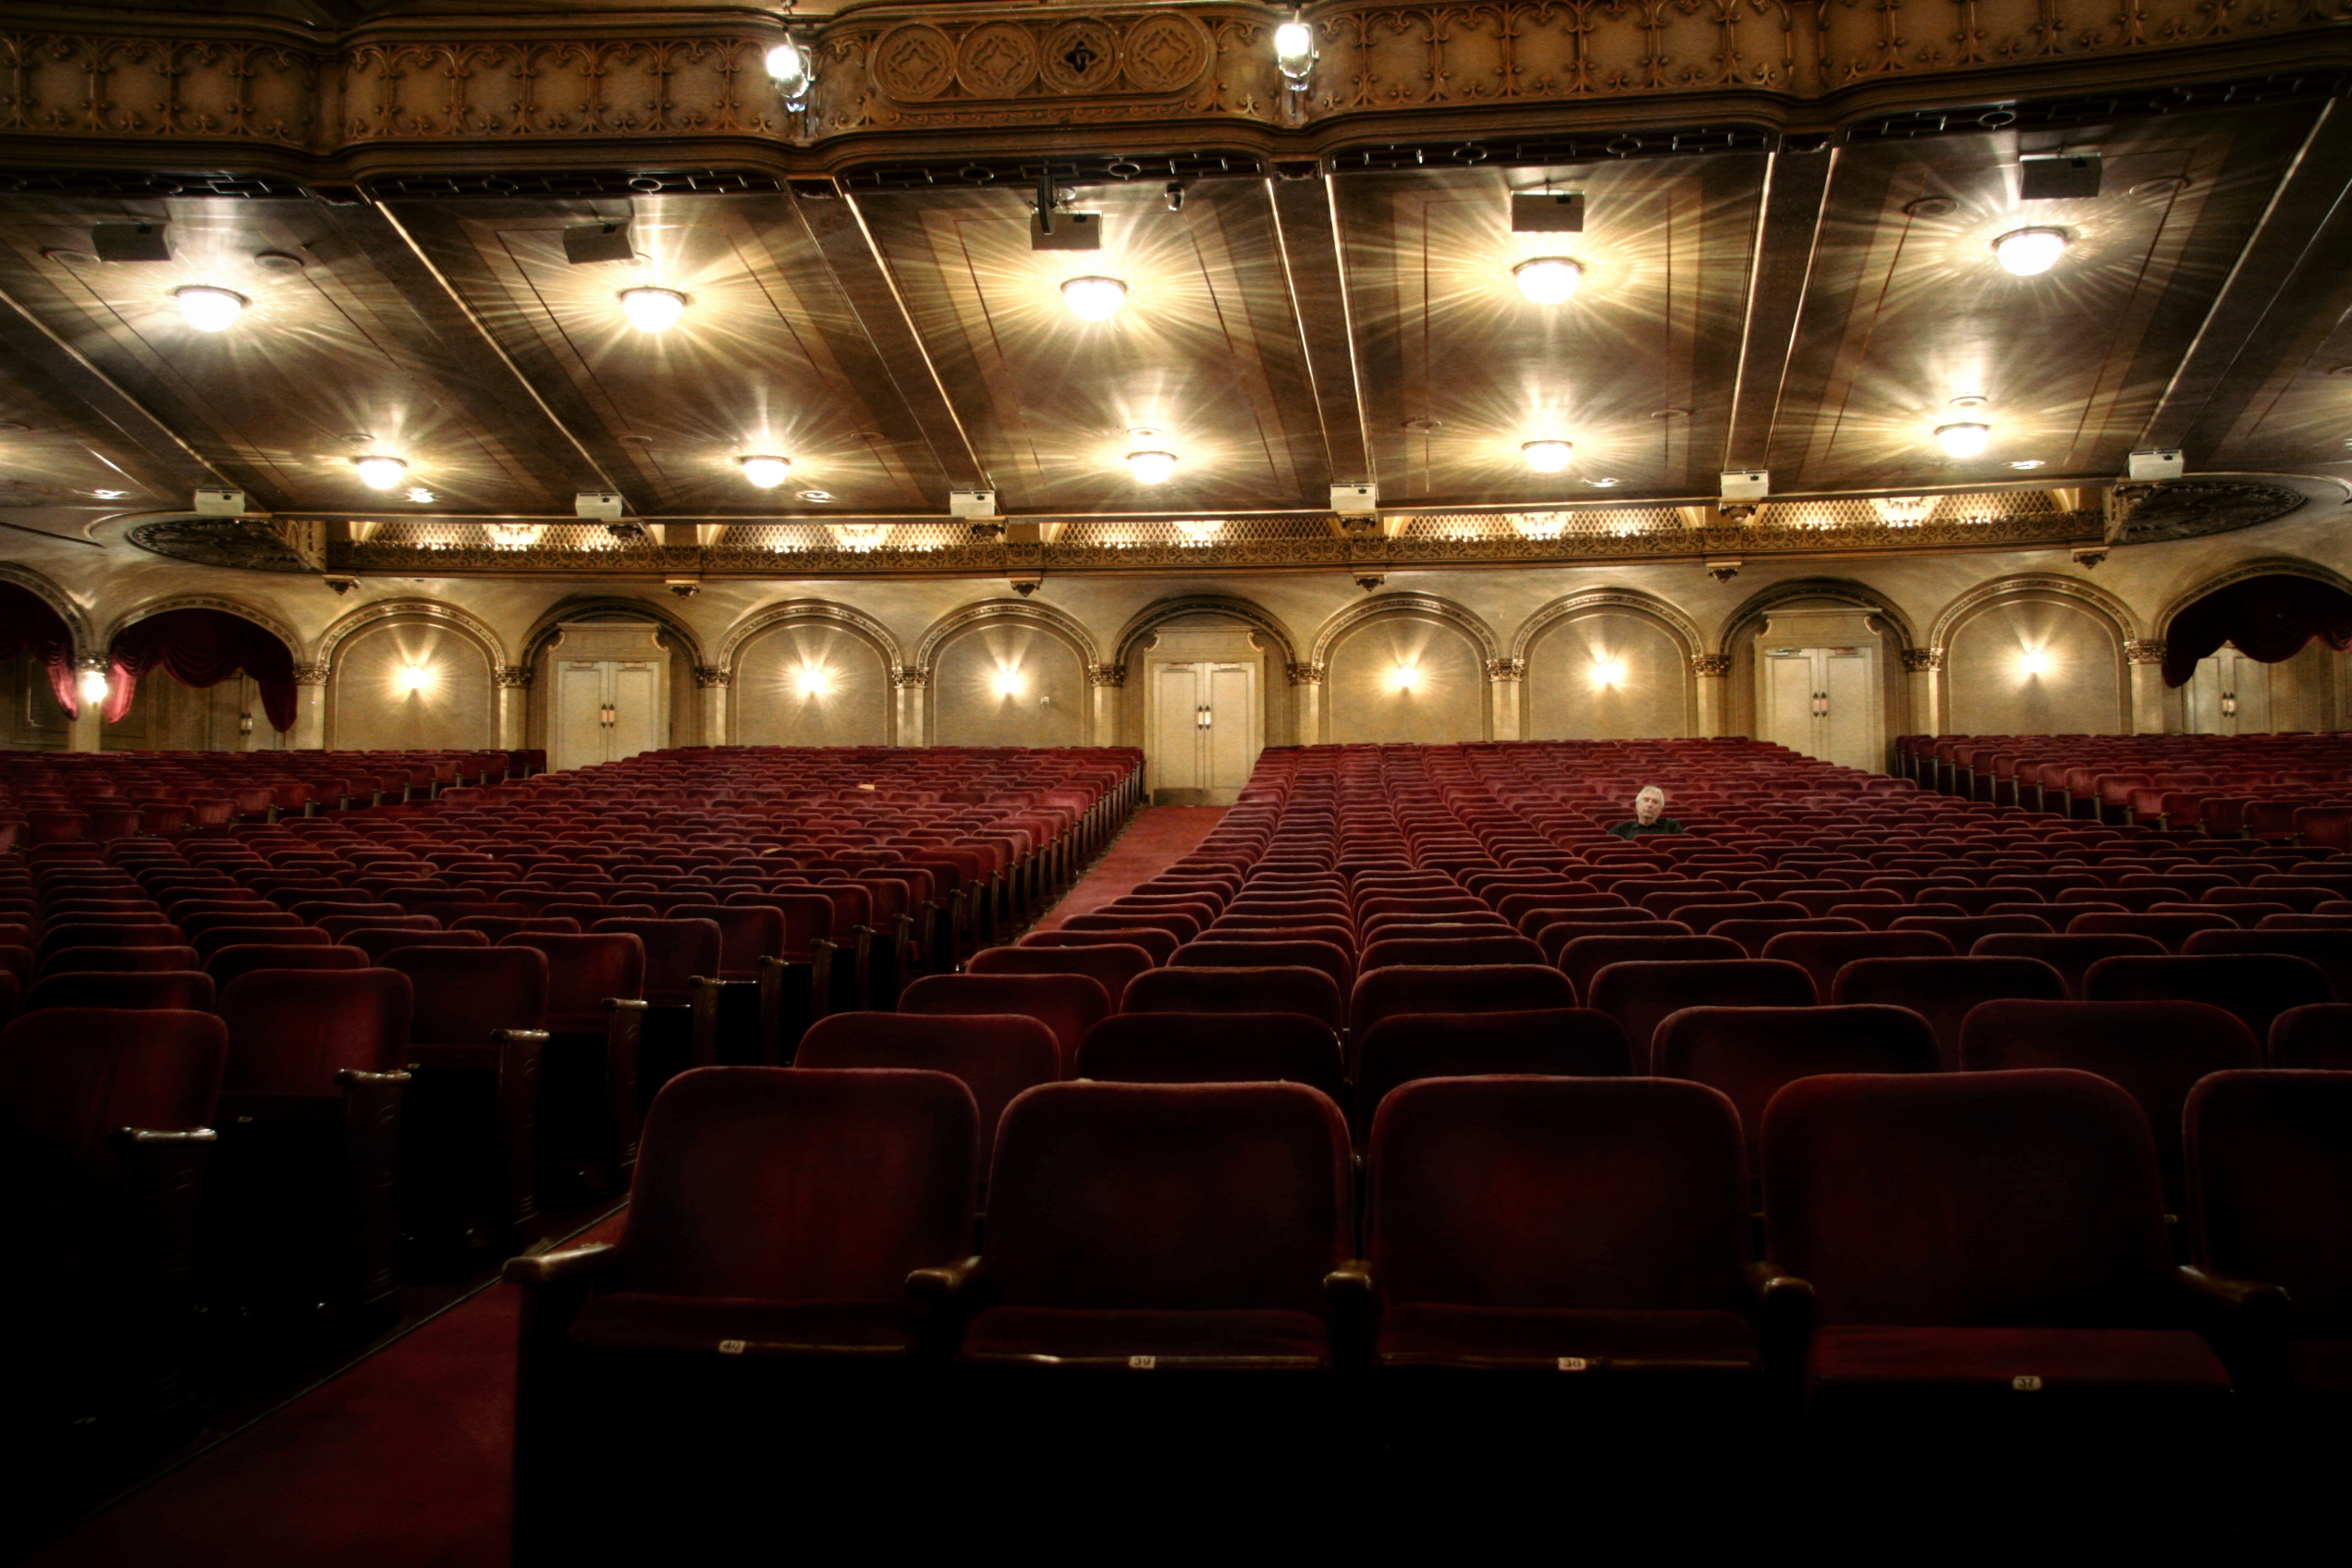 "Empty Theatre (almost)"by Kevin Jaako, licensed under CC BY 2.0